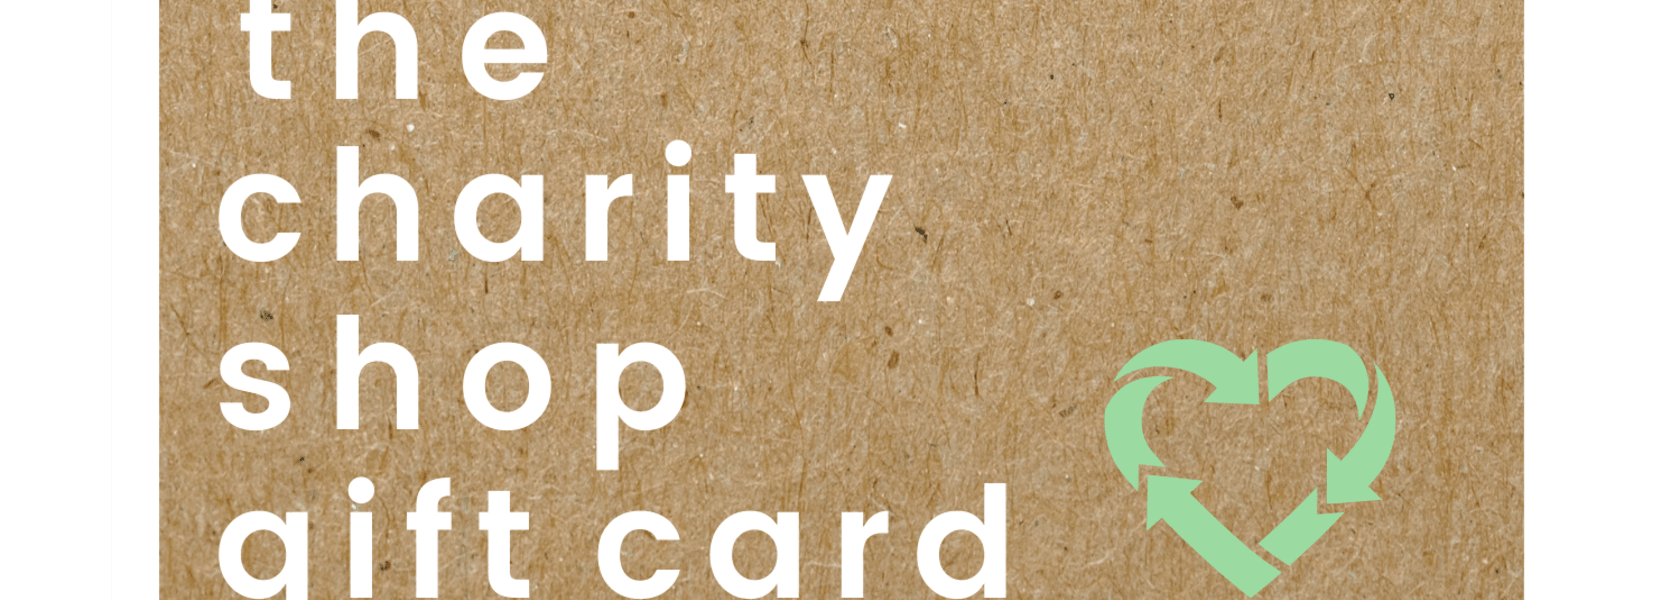 The Charity Shop Gift Card